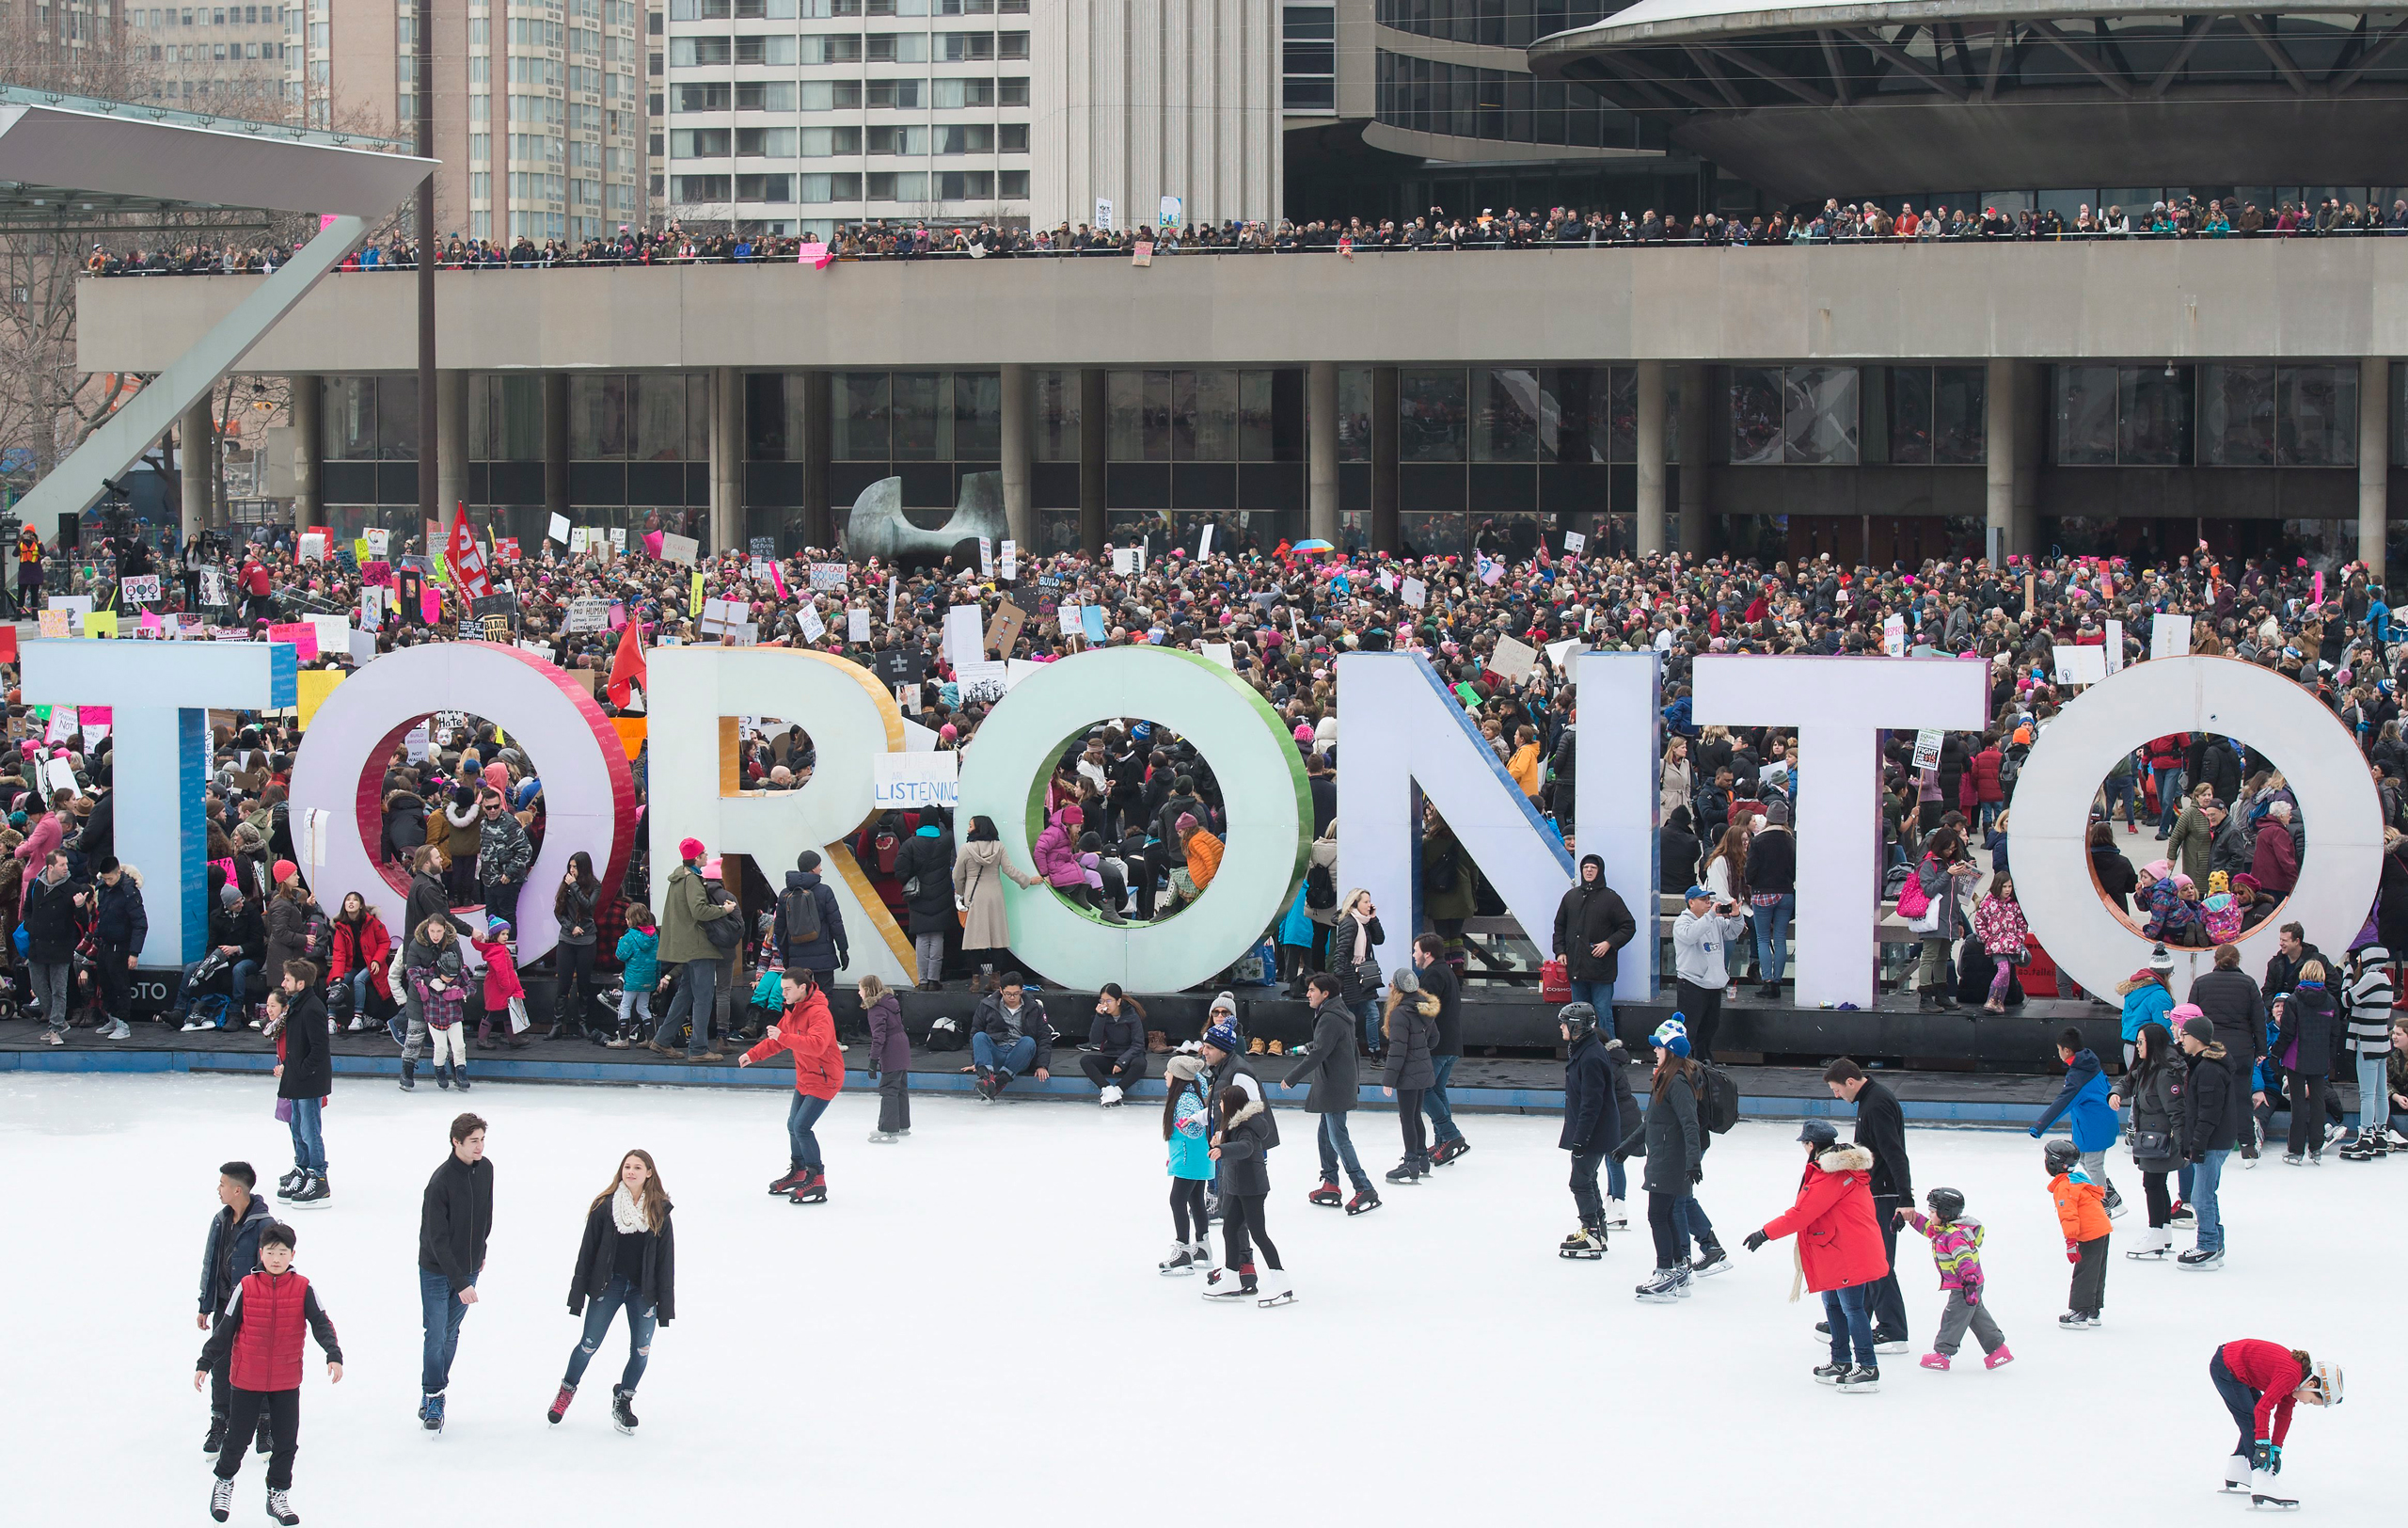 Protesters march gather in Nathan Phillips Square, in support of the Women's March on Washington, in Toronto on Jan. 21, 2017. (Frank Gunn—The Canadian Press/AP)